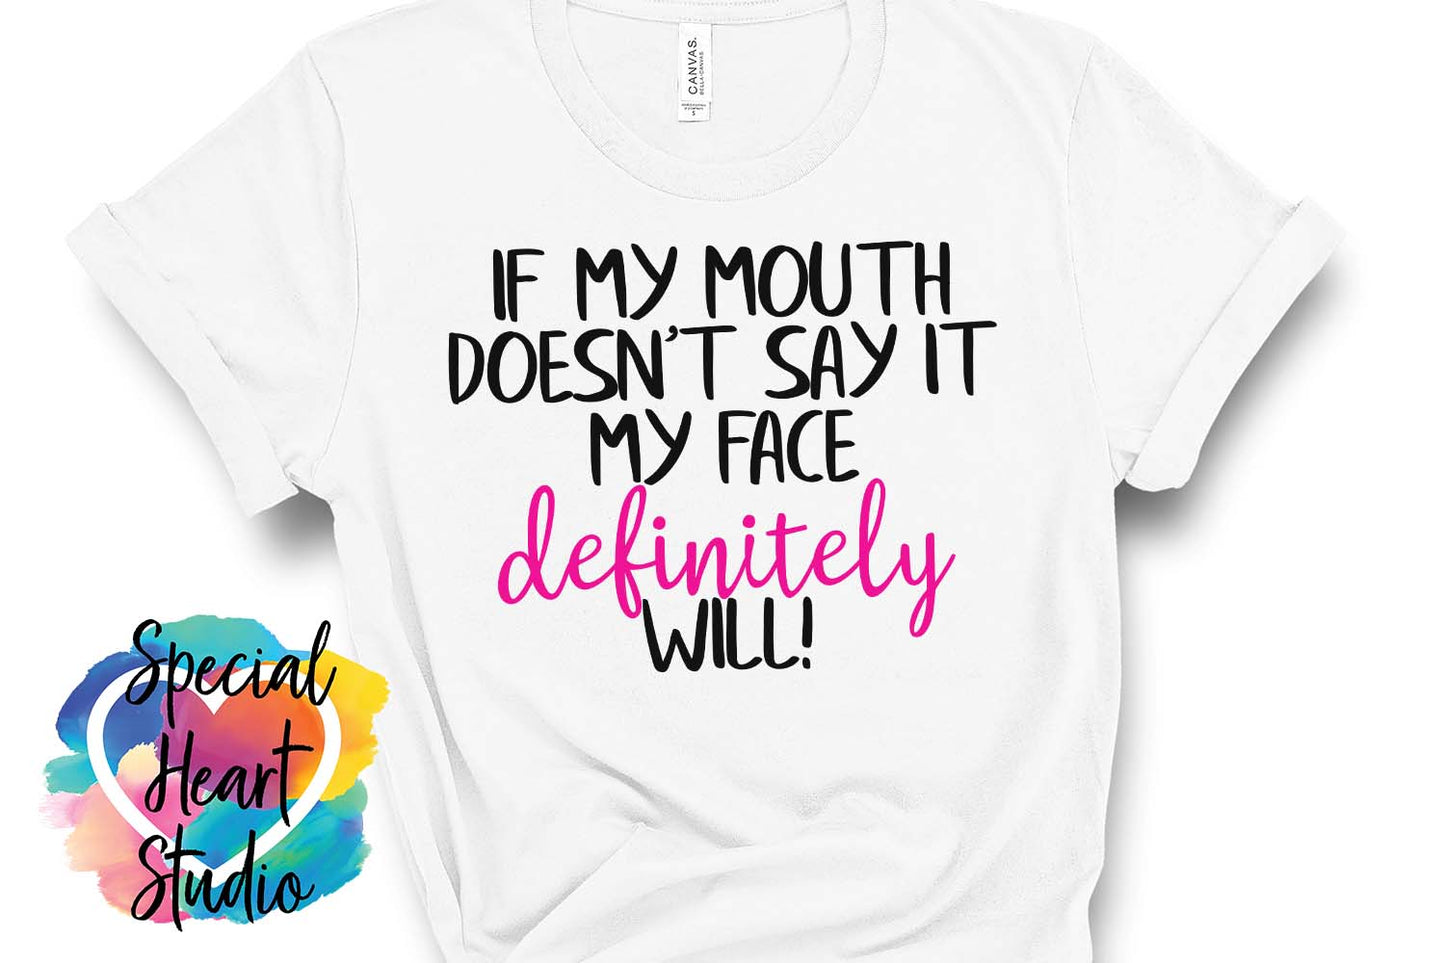 If my mouth doesn't say it, my face definitely will.